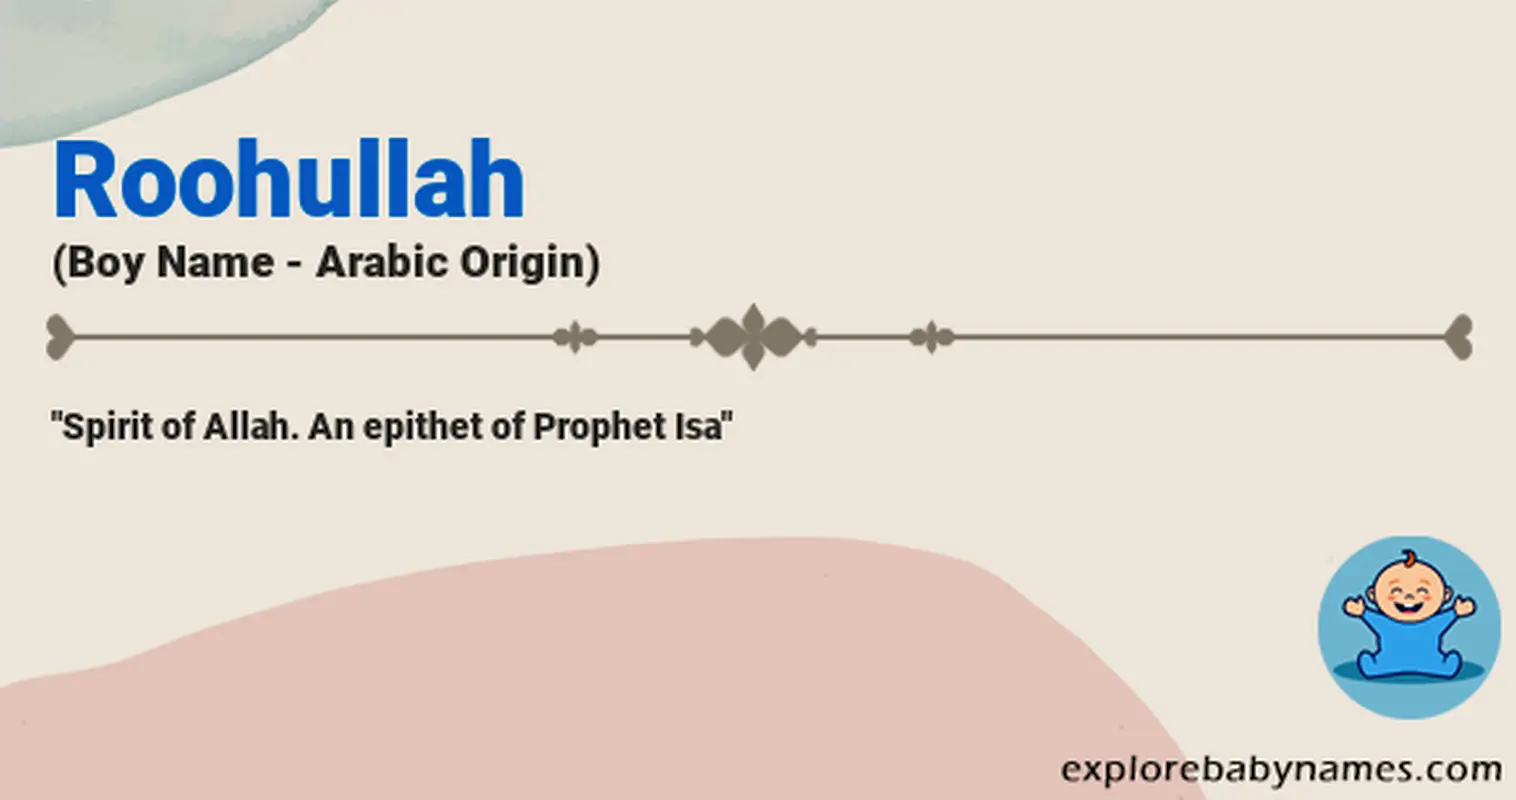 Meaning of Roohullah